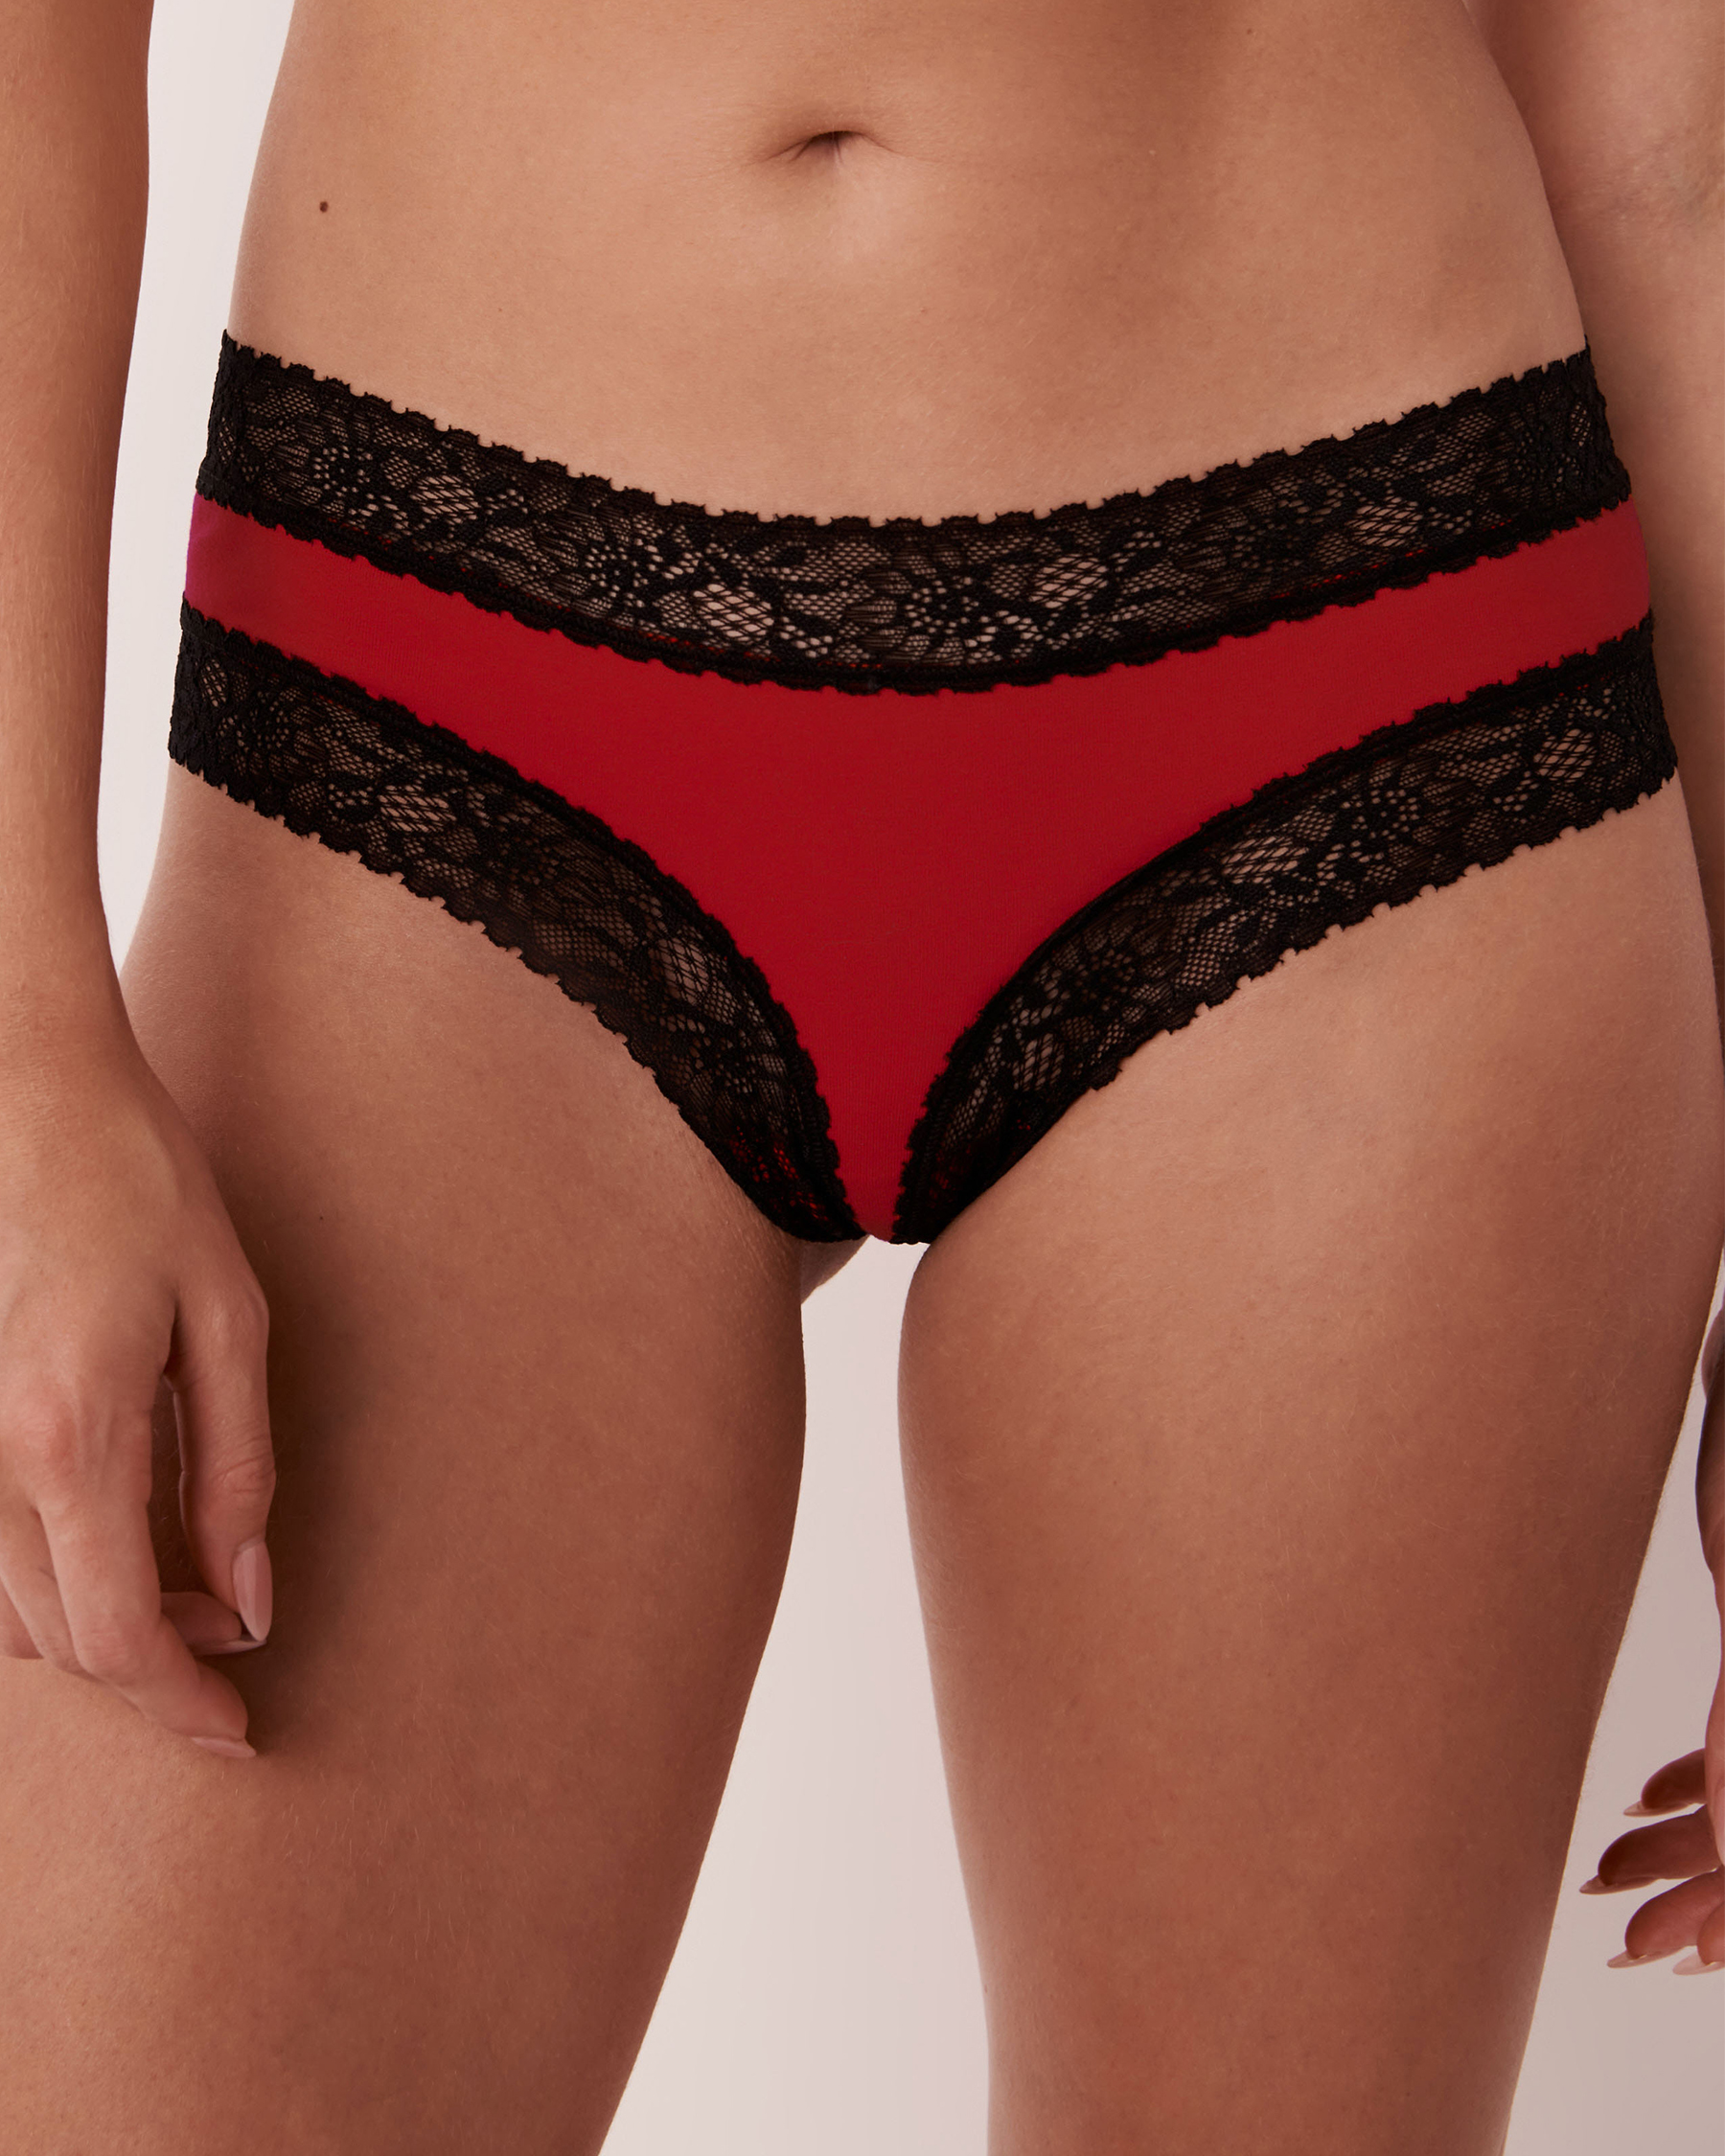 LA VIE EN ROSE Cotton and Lace Trim Cheeky Panty Candy red 20100226 - View1